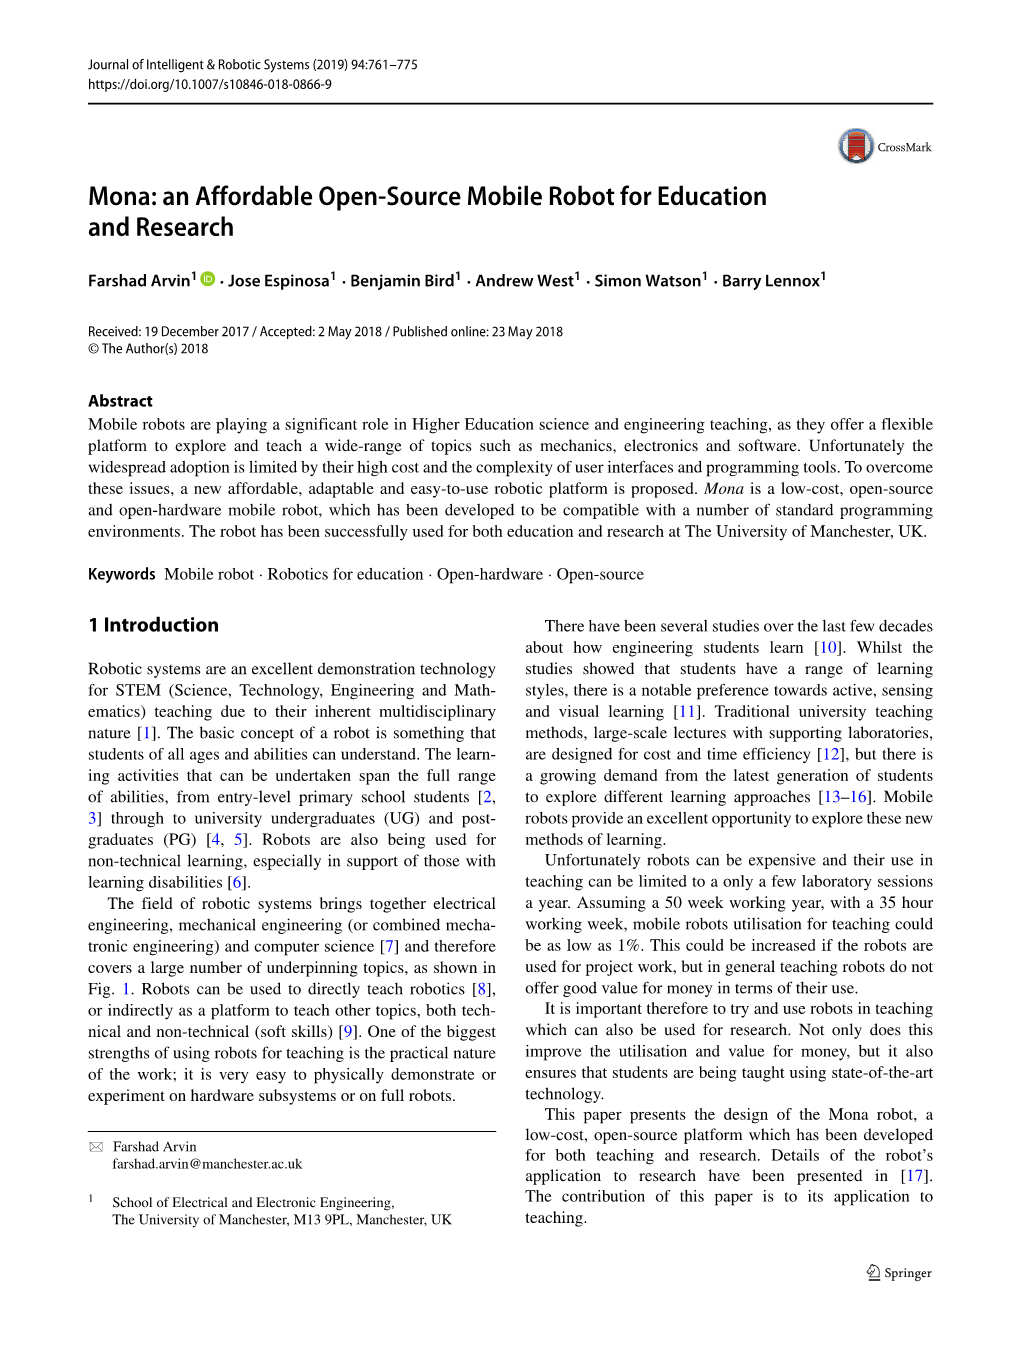 Mona: an Affordable Open-Source Mobile Robot for Education and Research